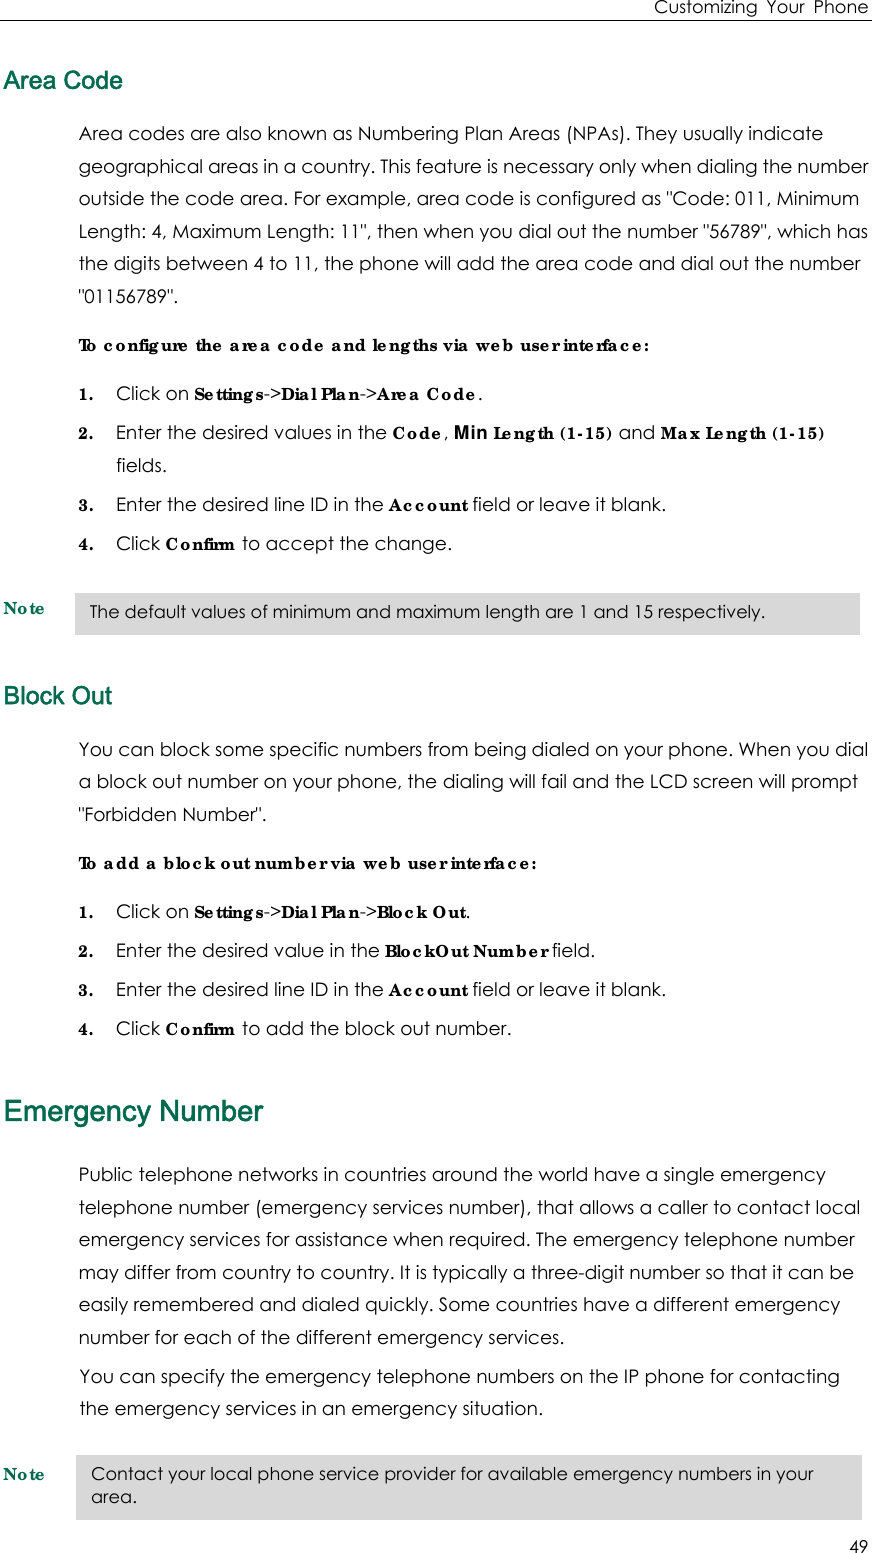 Customizing Your Phone 49 Area Code Area codes are also known as Numbering Plan Areas (NPAs). They usually indicate geographical areas in a country. This feature is necessary only when dialing the number outside the code area. For example, area code is configured as &quot;Code: 011, Minimum Length: 4, Maximum Length: 11&quot;, then when you dial out the number &quot;56789&quot;, which has the digits between 4 to 11, the phone will add the area code and dial out the number &quot;01156789&quot;. To configure the area code and lengths via web user interface: 1. Click on Settings-&gt;Dial Plan-&gt;Area Code. 2. Enter the desired values in the Code, Min Length (1-15) and Max Length (1-15) fields. 3. Enter the desired line ID in the Account field or leave it blank. 4. Click Confirm to accept the change. Note  Block Out You can block some specific numbers from being dialed on your phone. When you dial a block out number on your phone, the dialing will fail and the LCD screen will prompt &quot;Forbidden Number&quot;. To add a block out number via web user interface: 1. Click on Settings-&gt;Dial Plan-&gt;Block Out. 2. Enter the desired value in the BlockOut Number field. 3. Enter the desired line ID in the Account field or leave it blank. 4. Click Confirm to add the block out number. Emergency Number Public telephone networks in countries around the world have a single emergency telephone number (emergency services number), that allows a caller to contact local emergency services for assistance when required. The emergency telephone number may differ from country to country. It is typically a three-digit number so that it can be easily remembered and dialed quickly. Some countries have a different emergency number for each of the different emergency services. You can specify the emergency telephone numbers on the IP phone for contacting the emergency services in an emergency situation. Note The default values of minimum and maximum length are 1 and 15 respectively. Contact your local phone service provider for available emergency numbers in your area. 